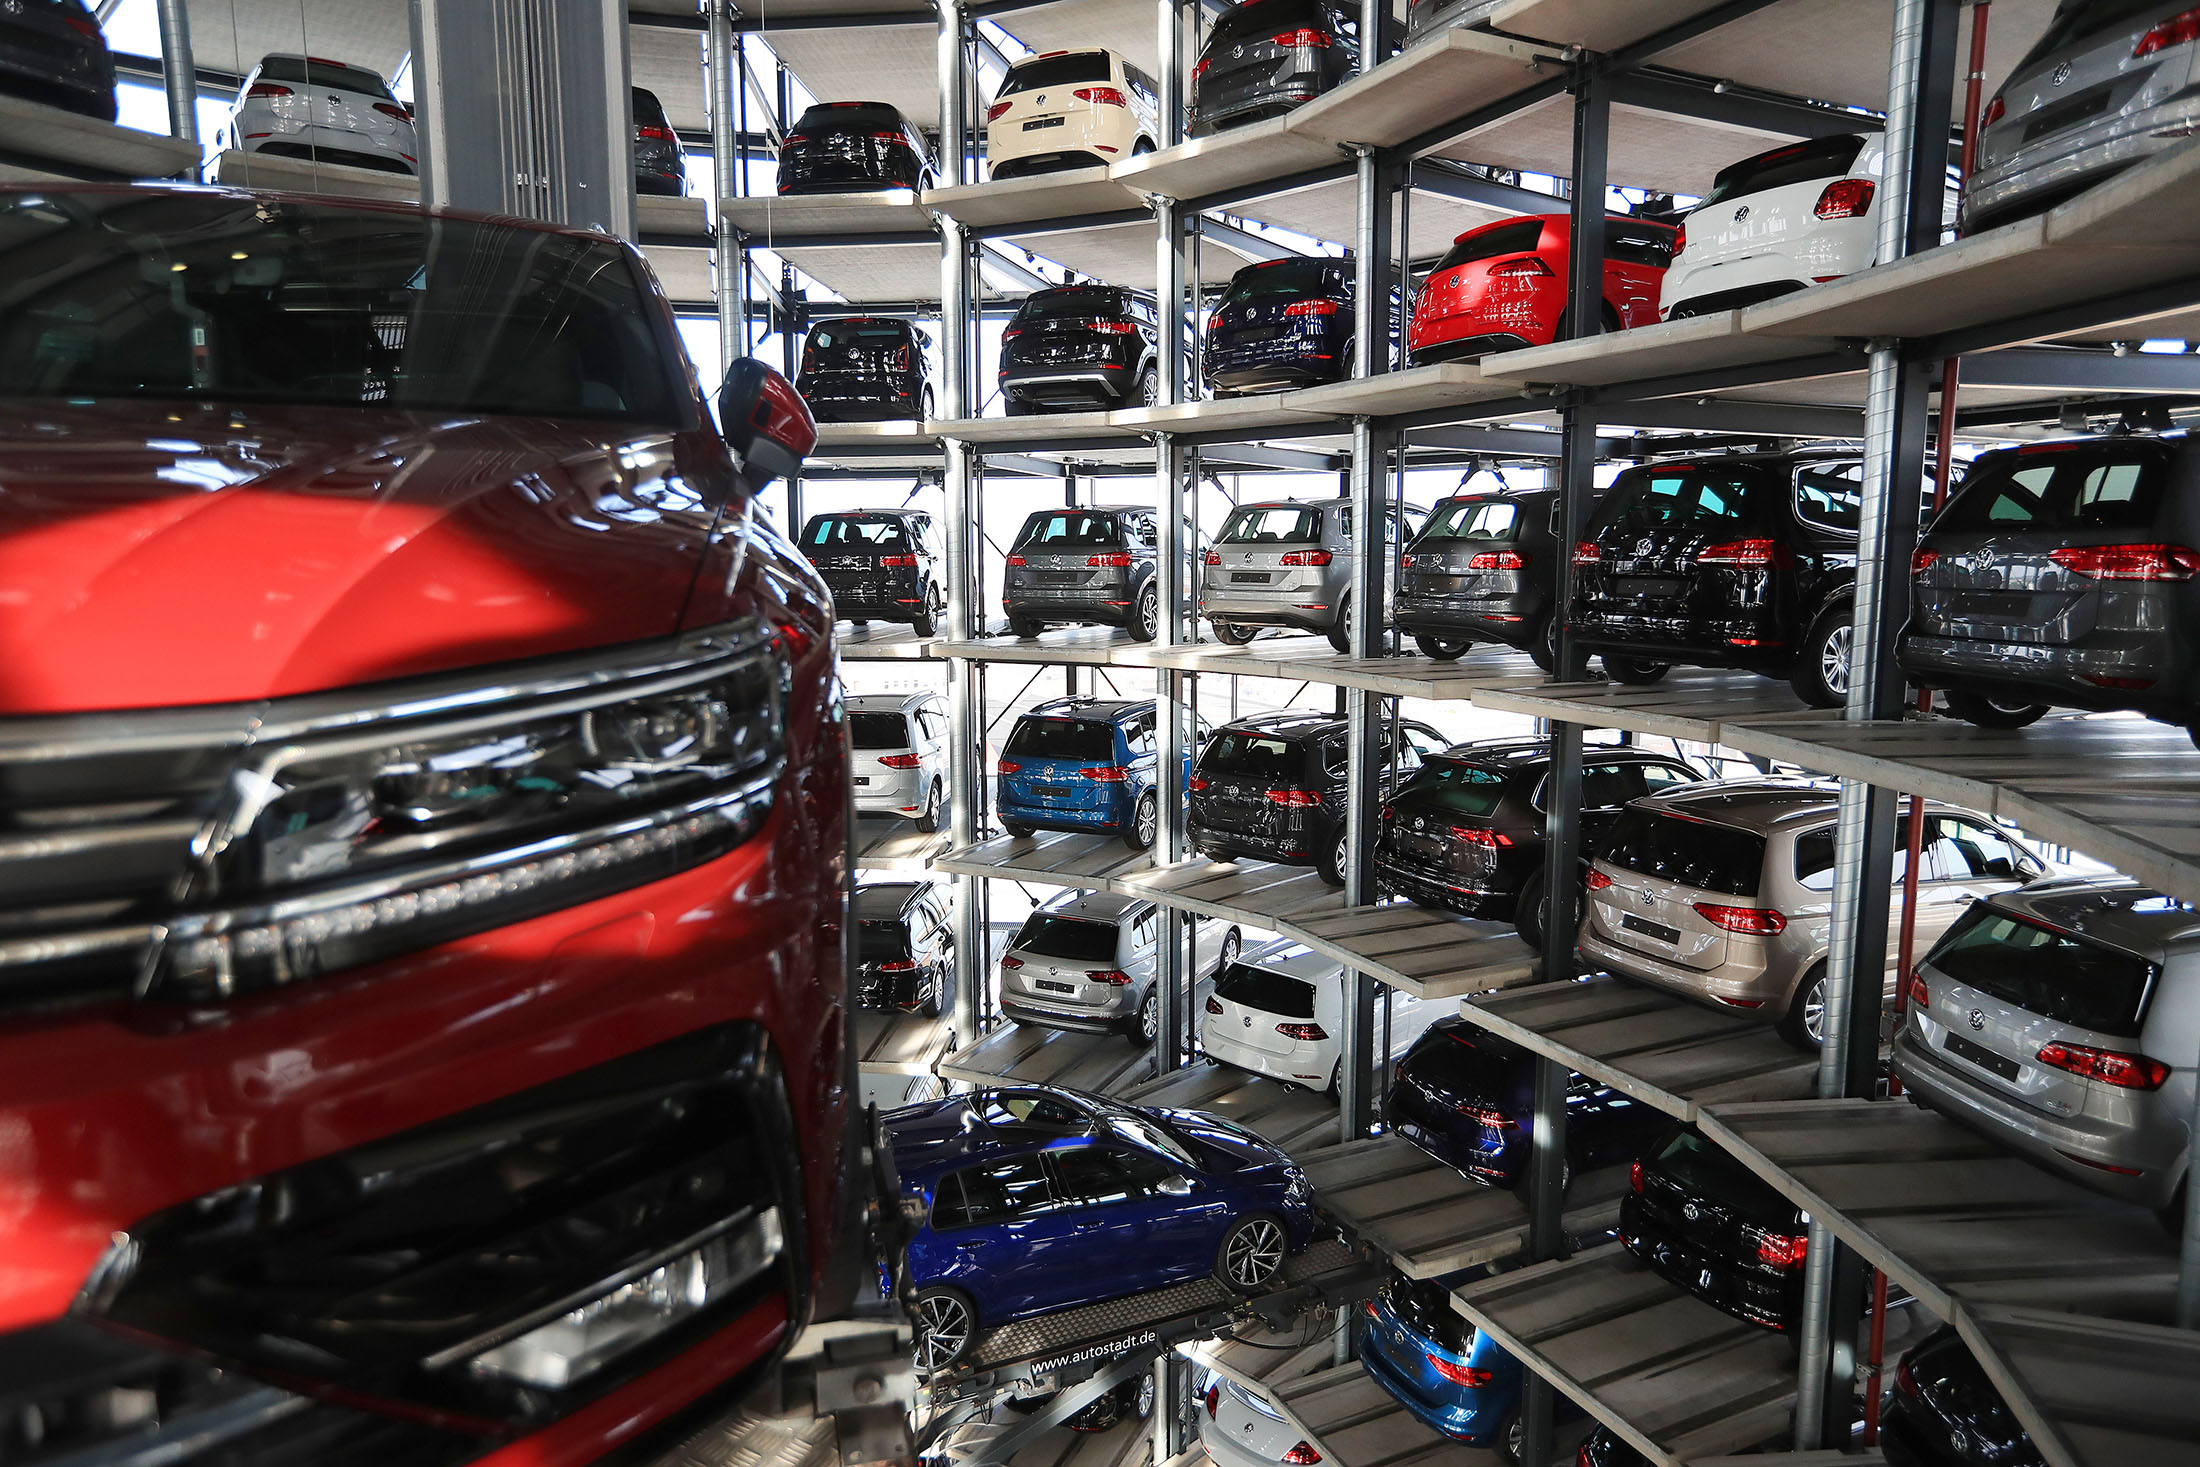 A new Tiguan sports utility vehicle (SUV), produced by Volkswagen AG (VW), left, is transported on an elevation platform as new VW automobiles sit in storage bays inside one of the automaker's glass delivery towers at the VW factory in Wolfsburg, Germany, on Tuesday, March 14, 2017. Volkswagen sought to draw a line under the diesel scandal that has locked it in crisis mode for more than a year, with sweeping restructuring efforts starting to take hold and profitability improving at the namesake auto brand.
